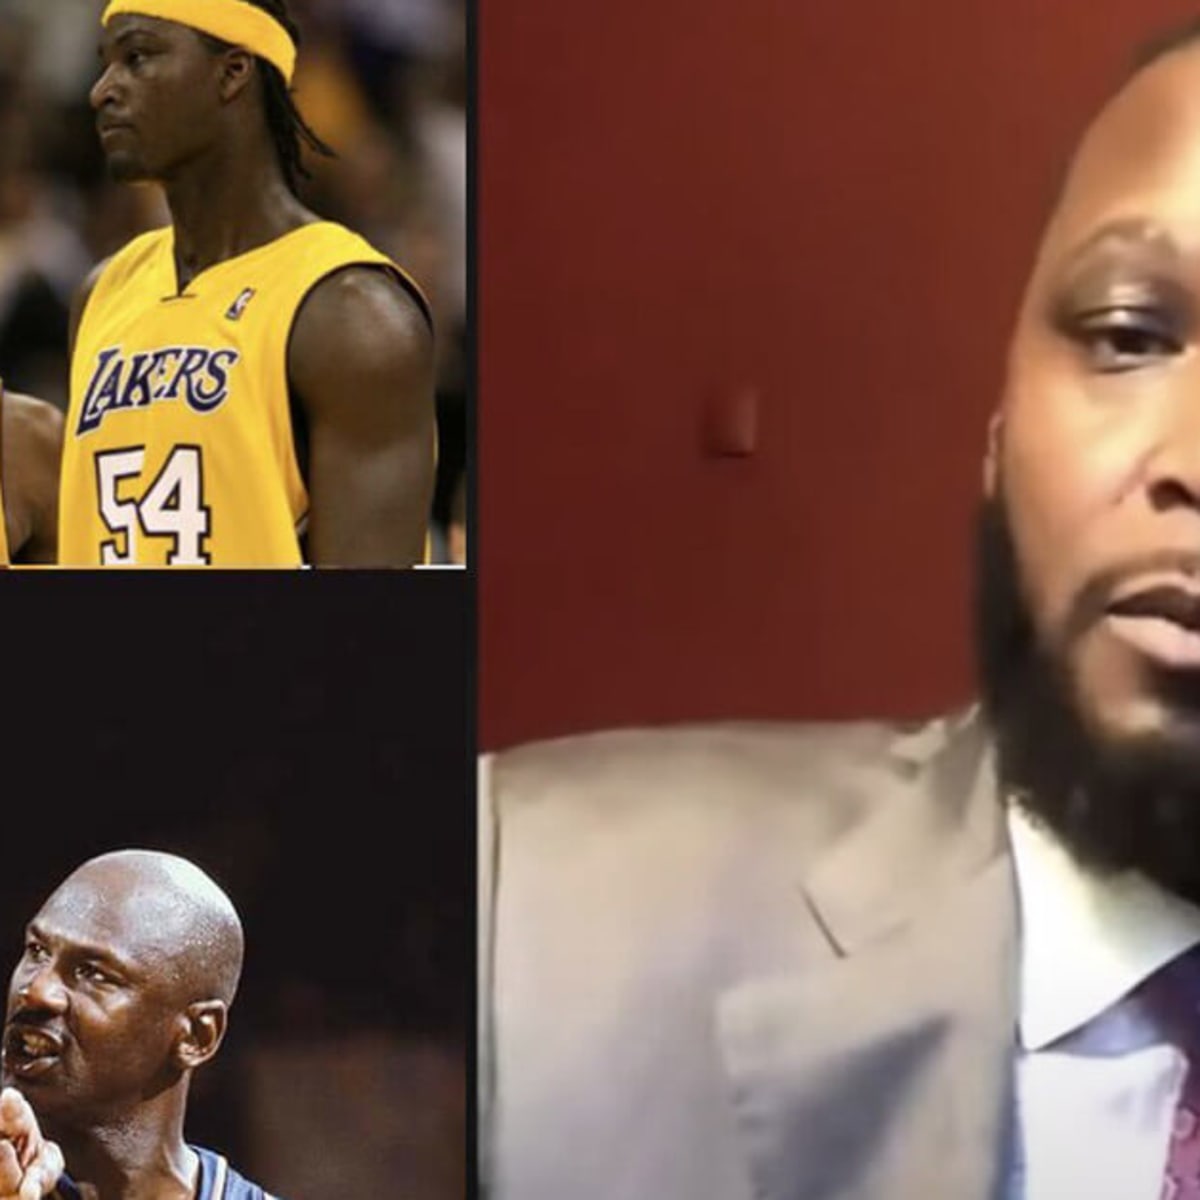 The Kwame Brown fiasco is a cautionary tale for media